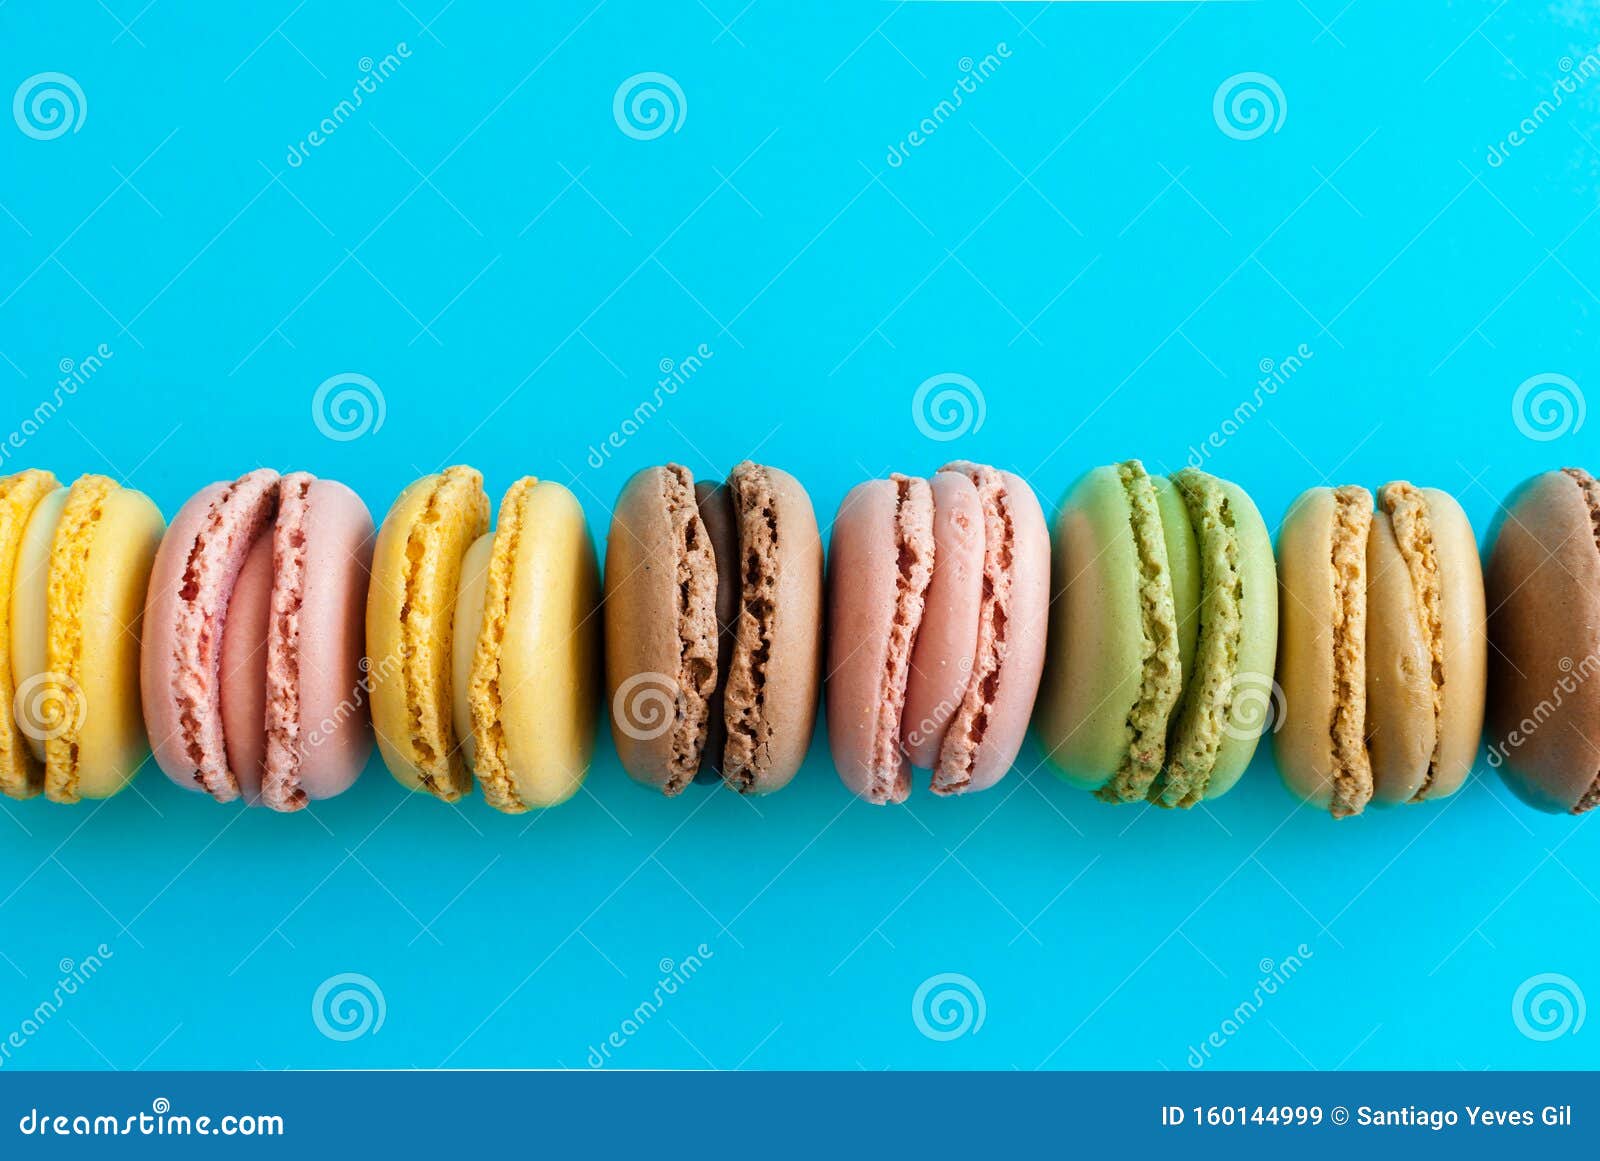 Top View of a Colorful French Macaron Dessert on a Blue Background ...